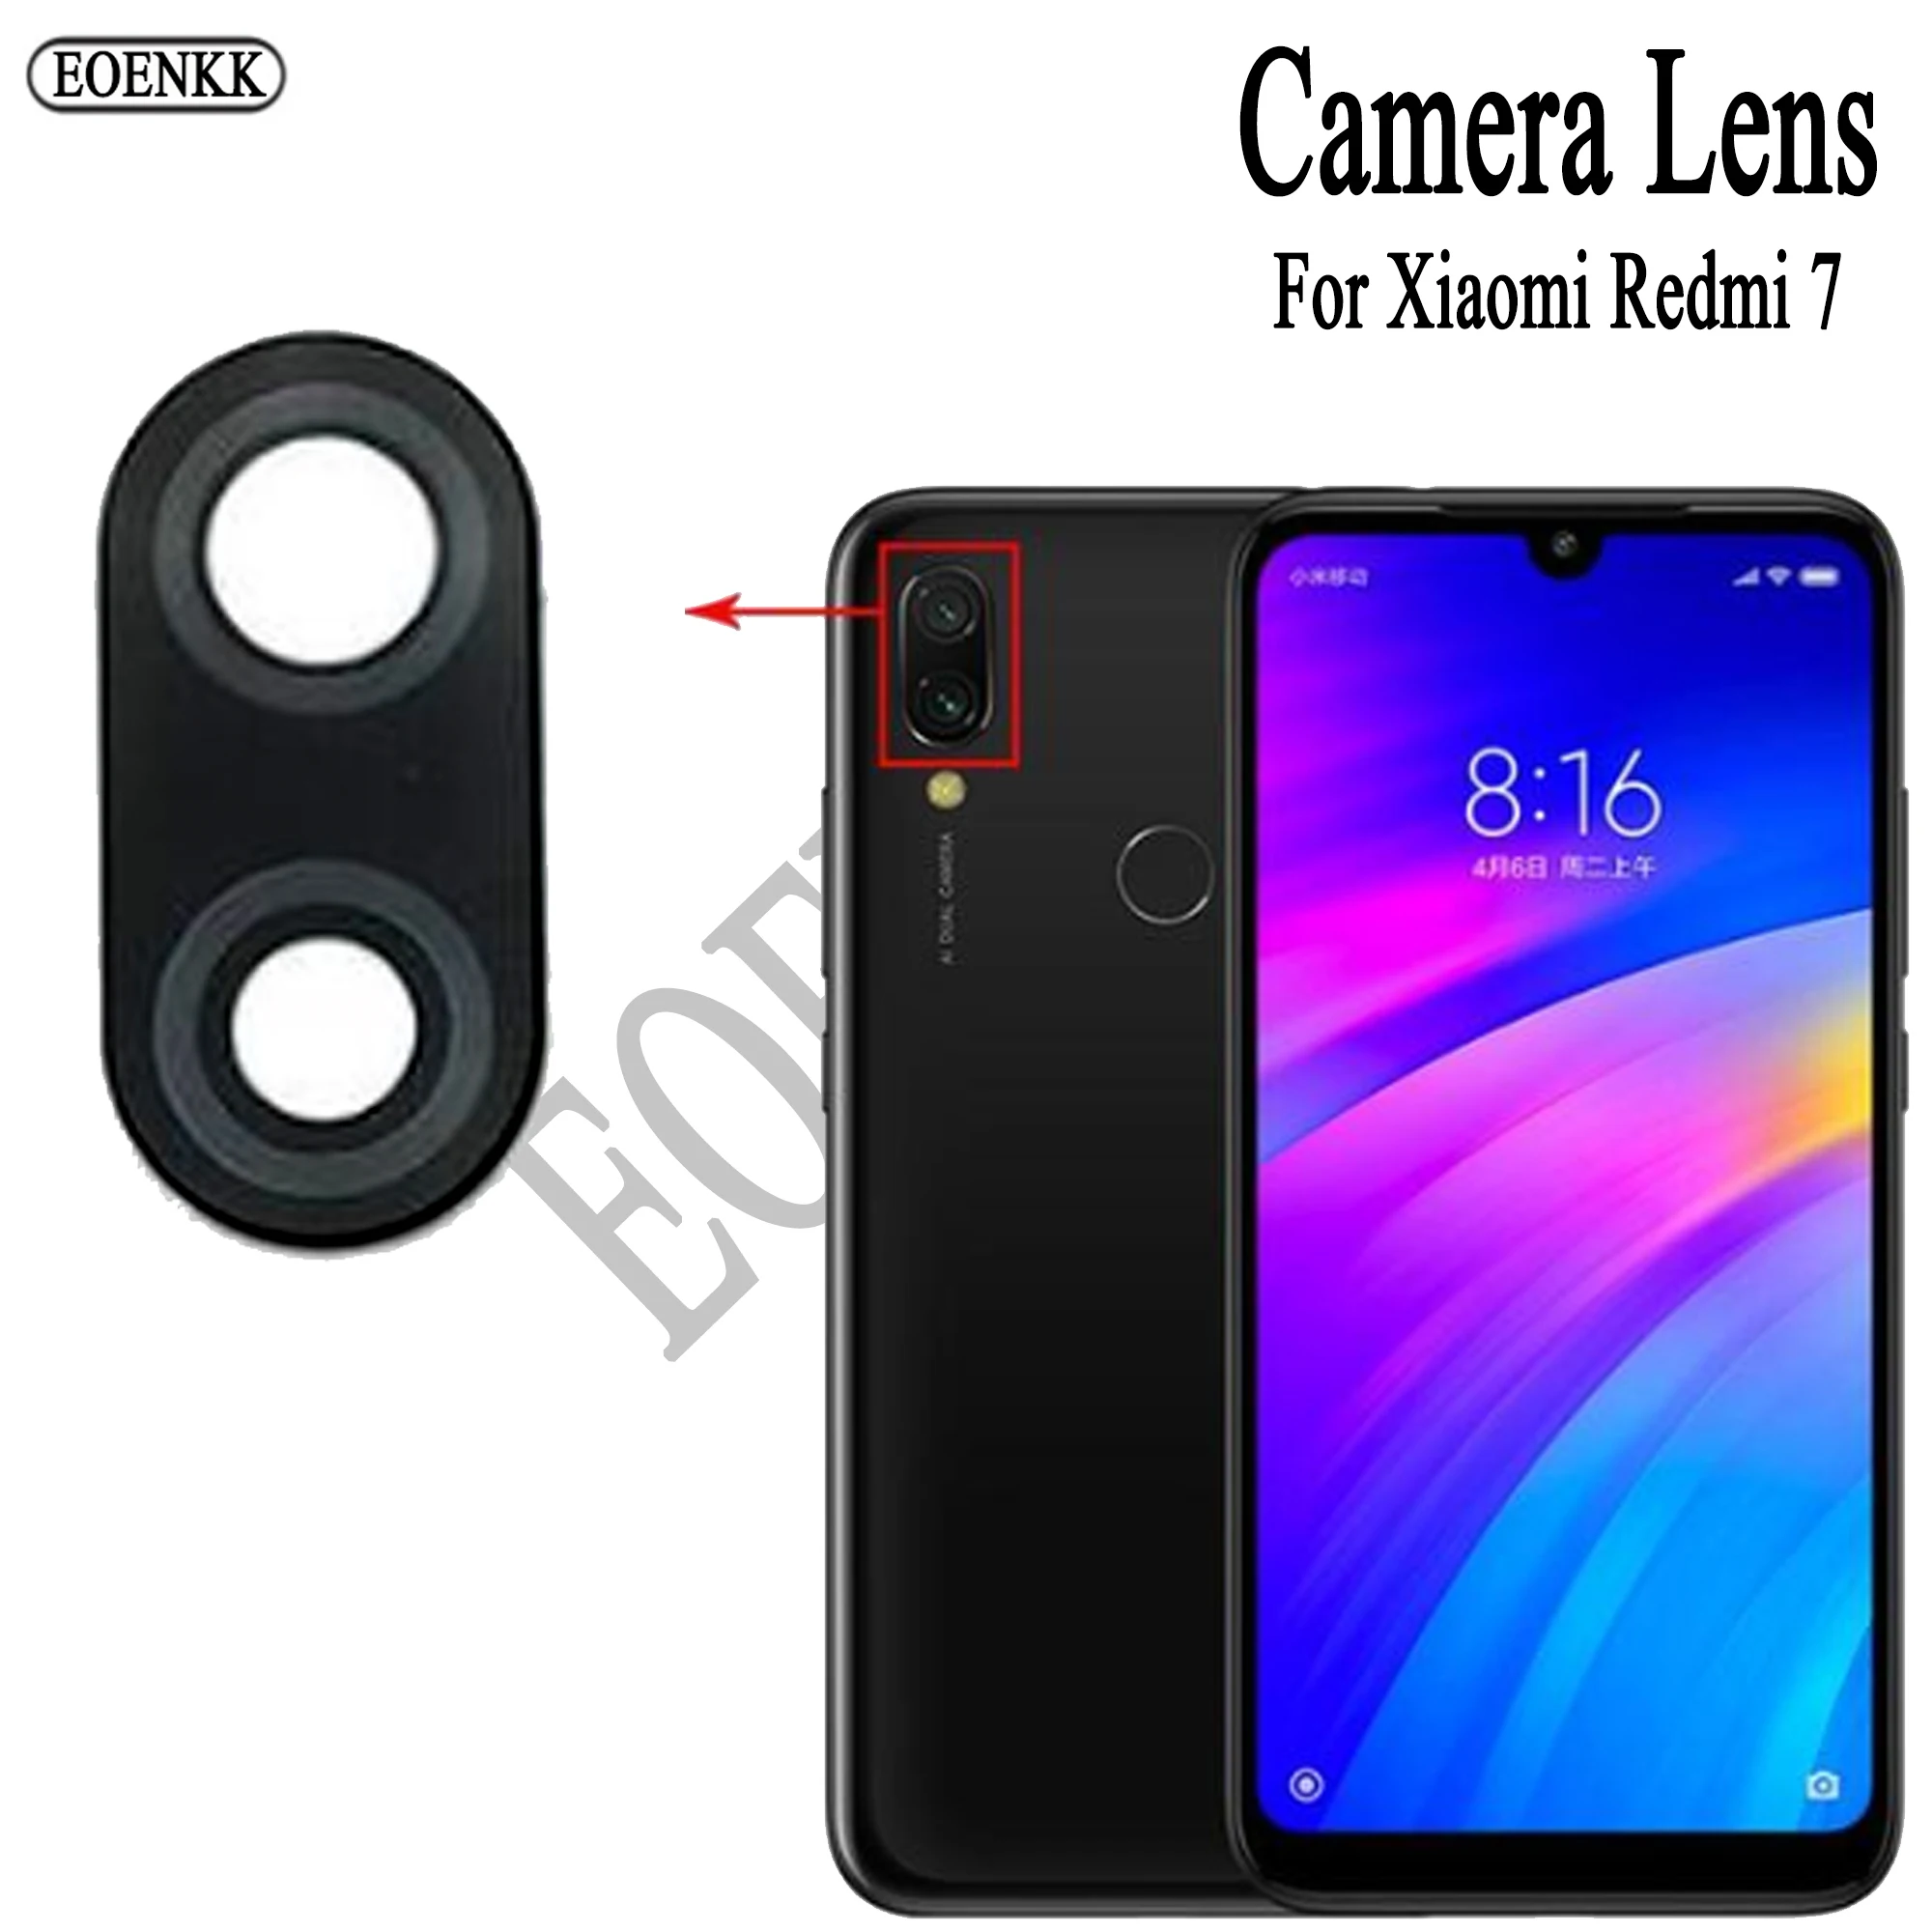 2set/lot Back Rear Camera Lens For Xiaomi Redmi 7 mobile phone accessories Back Camera Protector Glass Lens Cover With